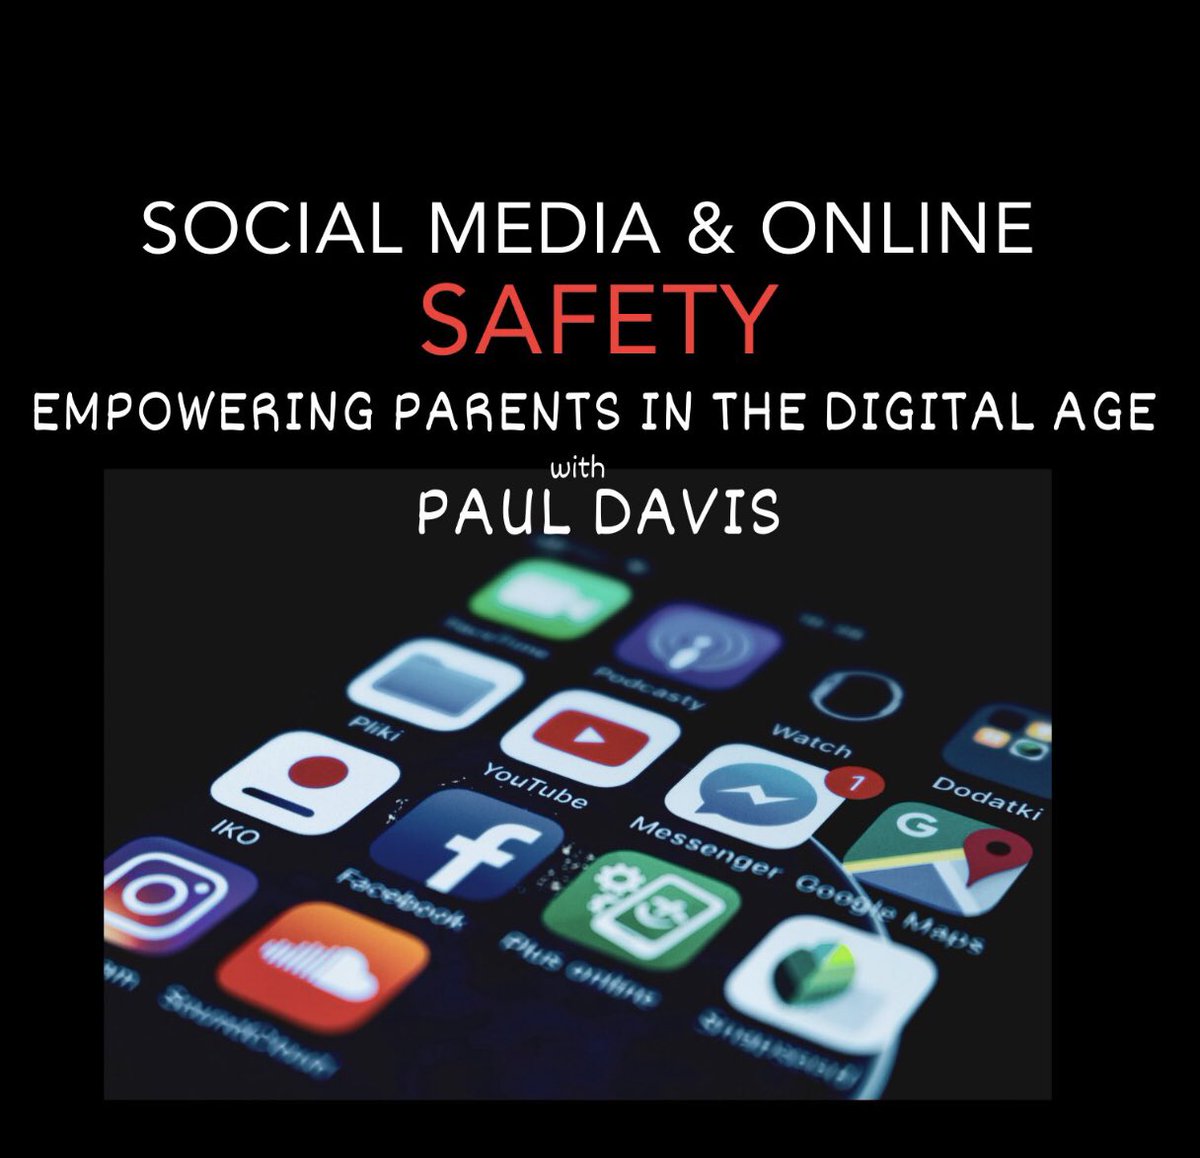 “The internet never forgets!” Thank you @pauldavisSNS for such a powerful presentation. We ALL took something from your challenge and call to action!